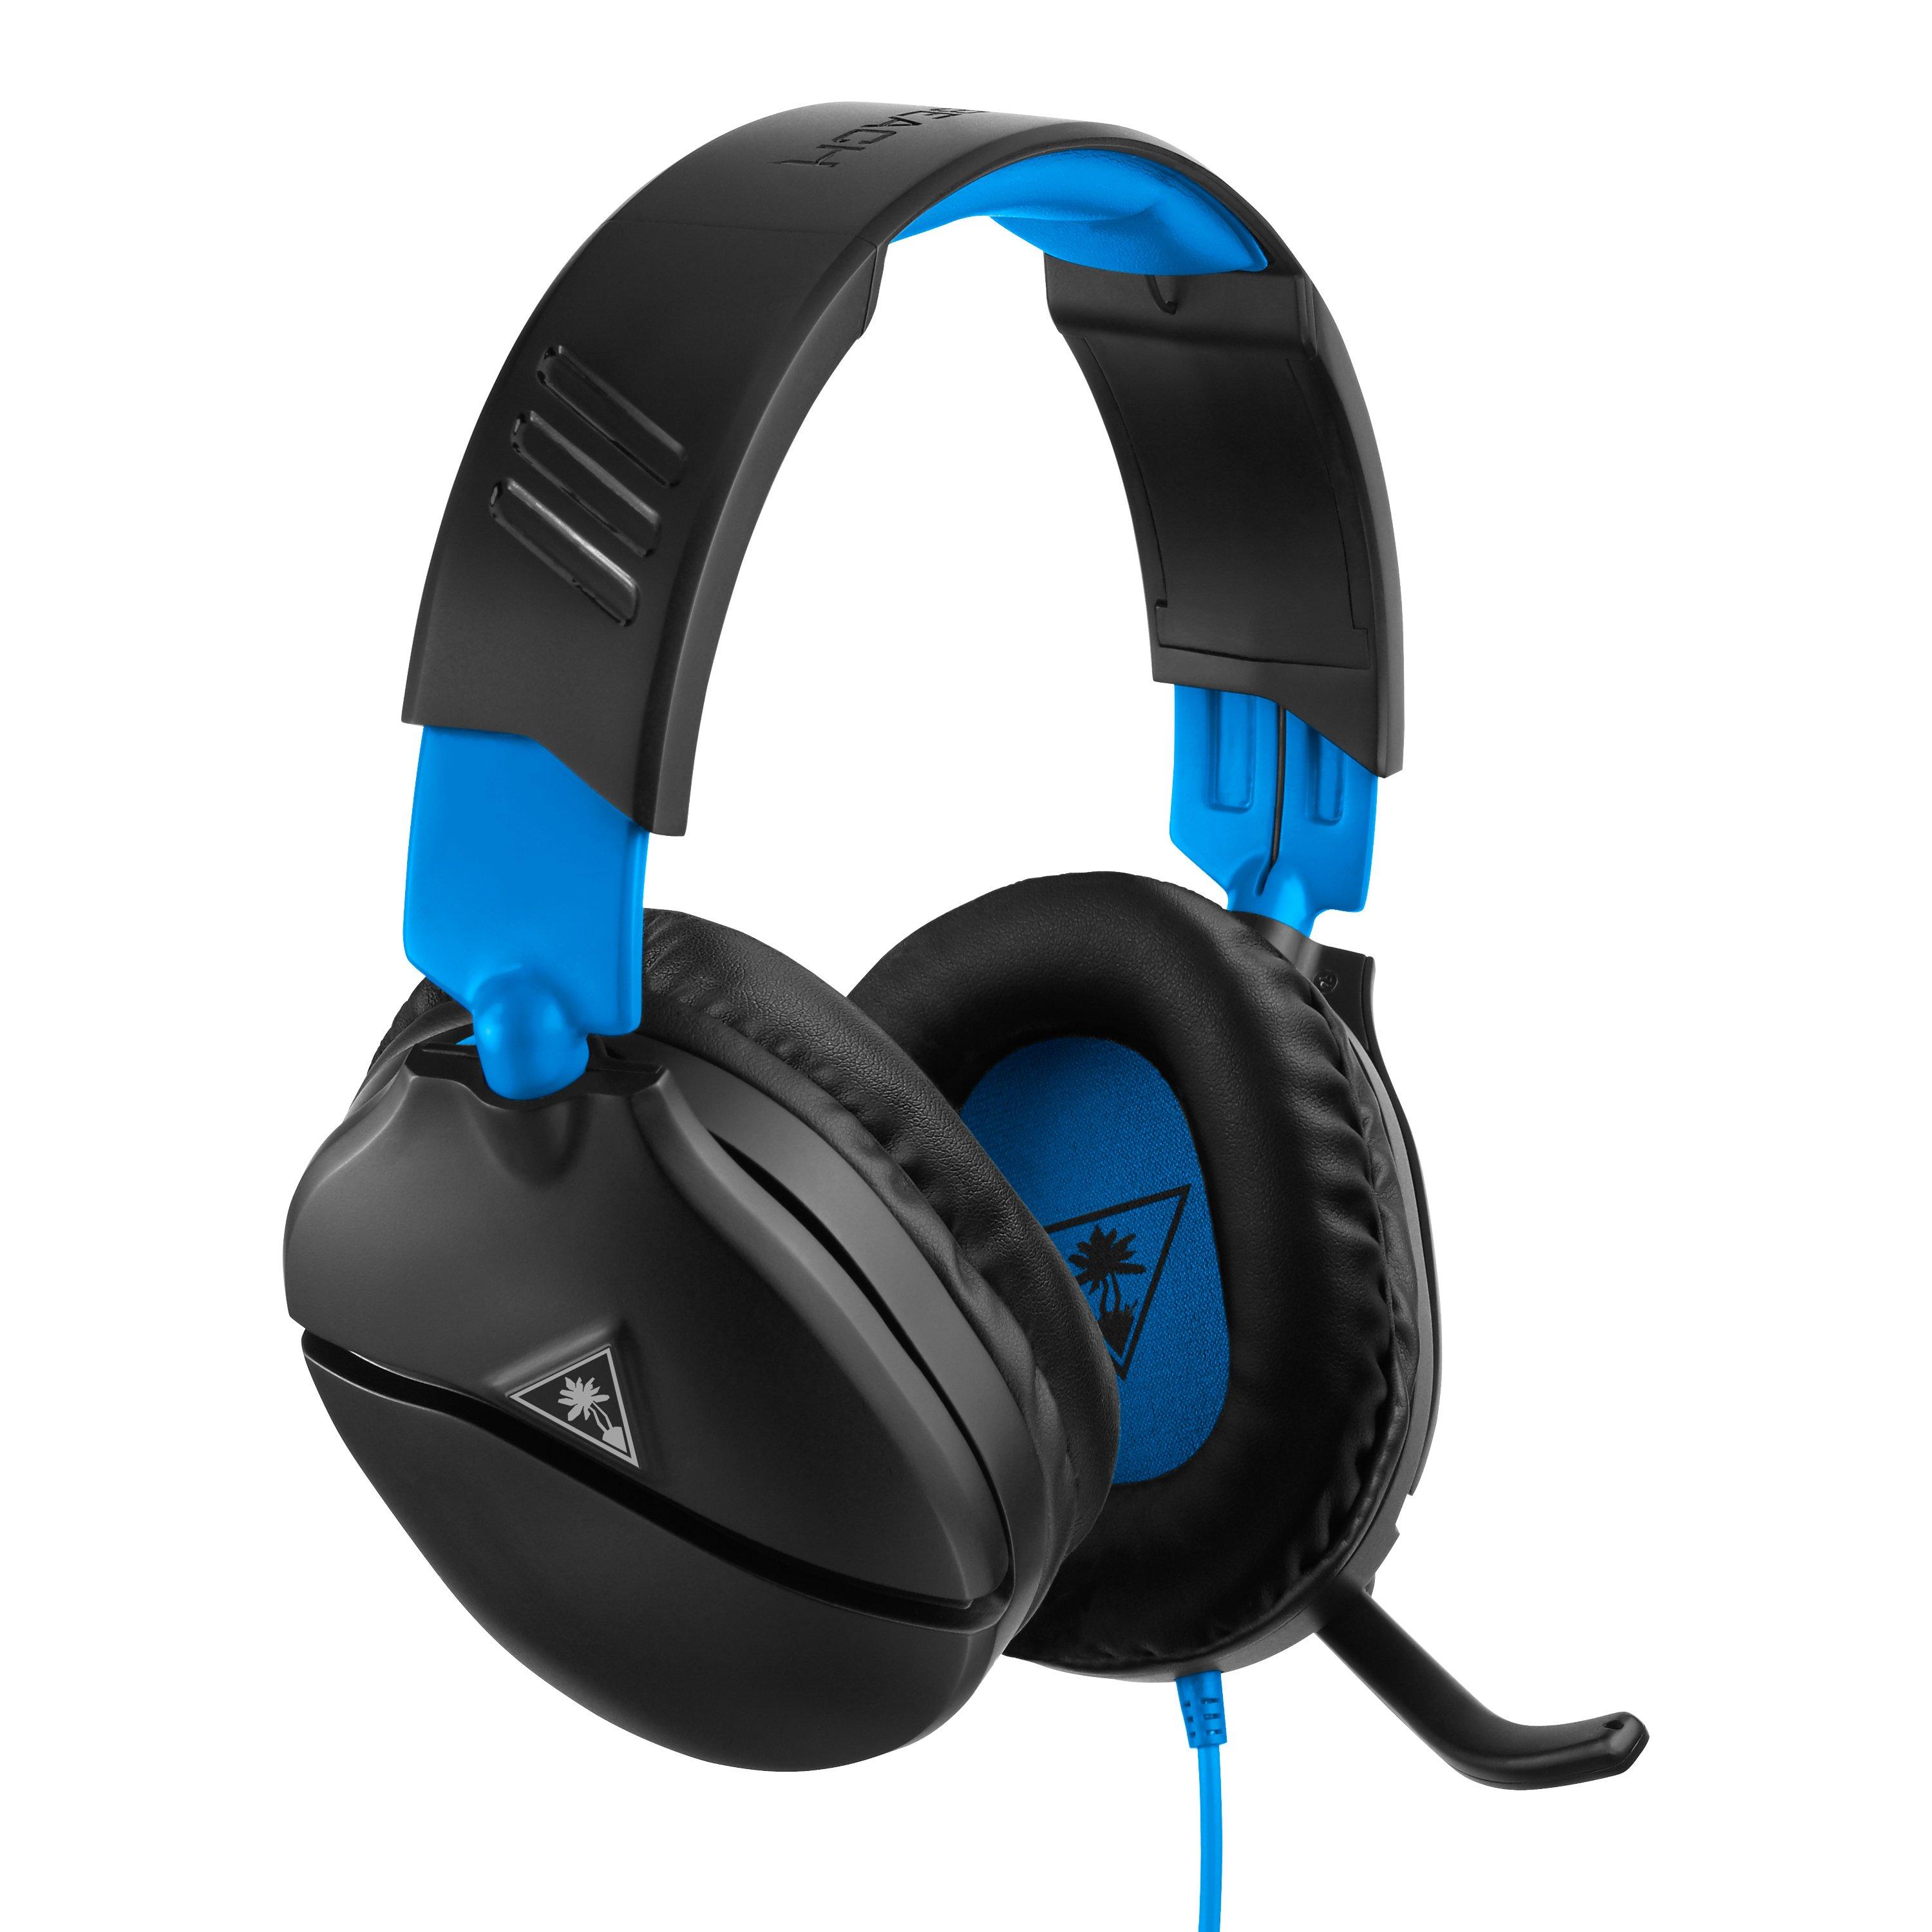 how to use ps4 headset on ps3